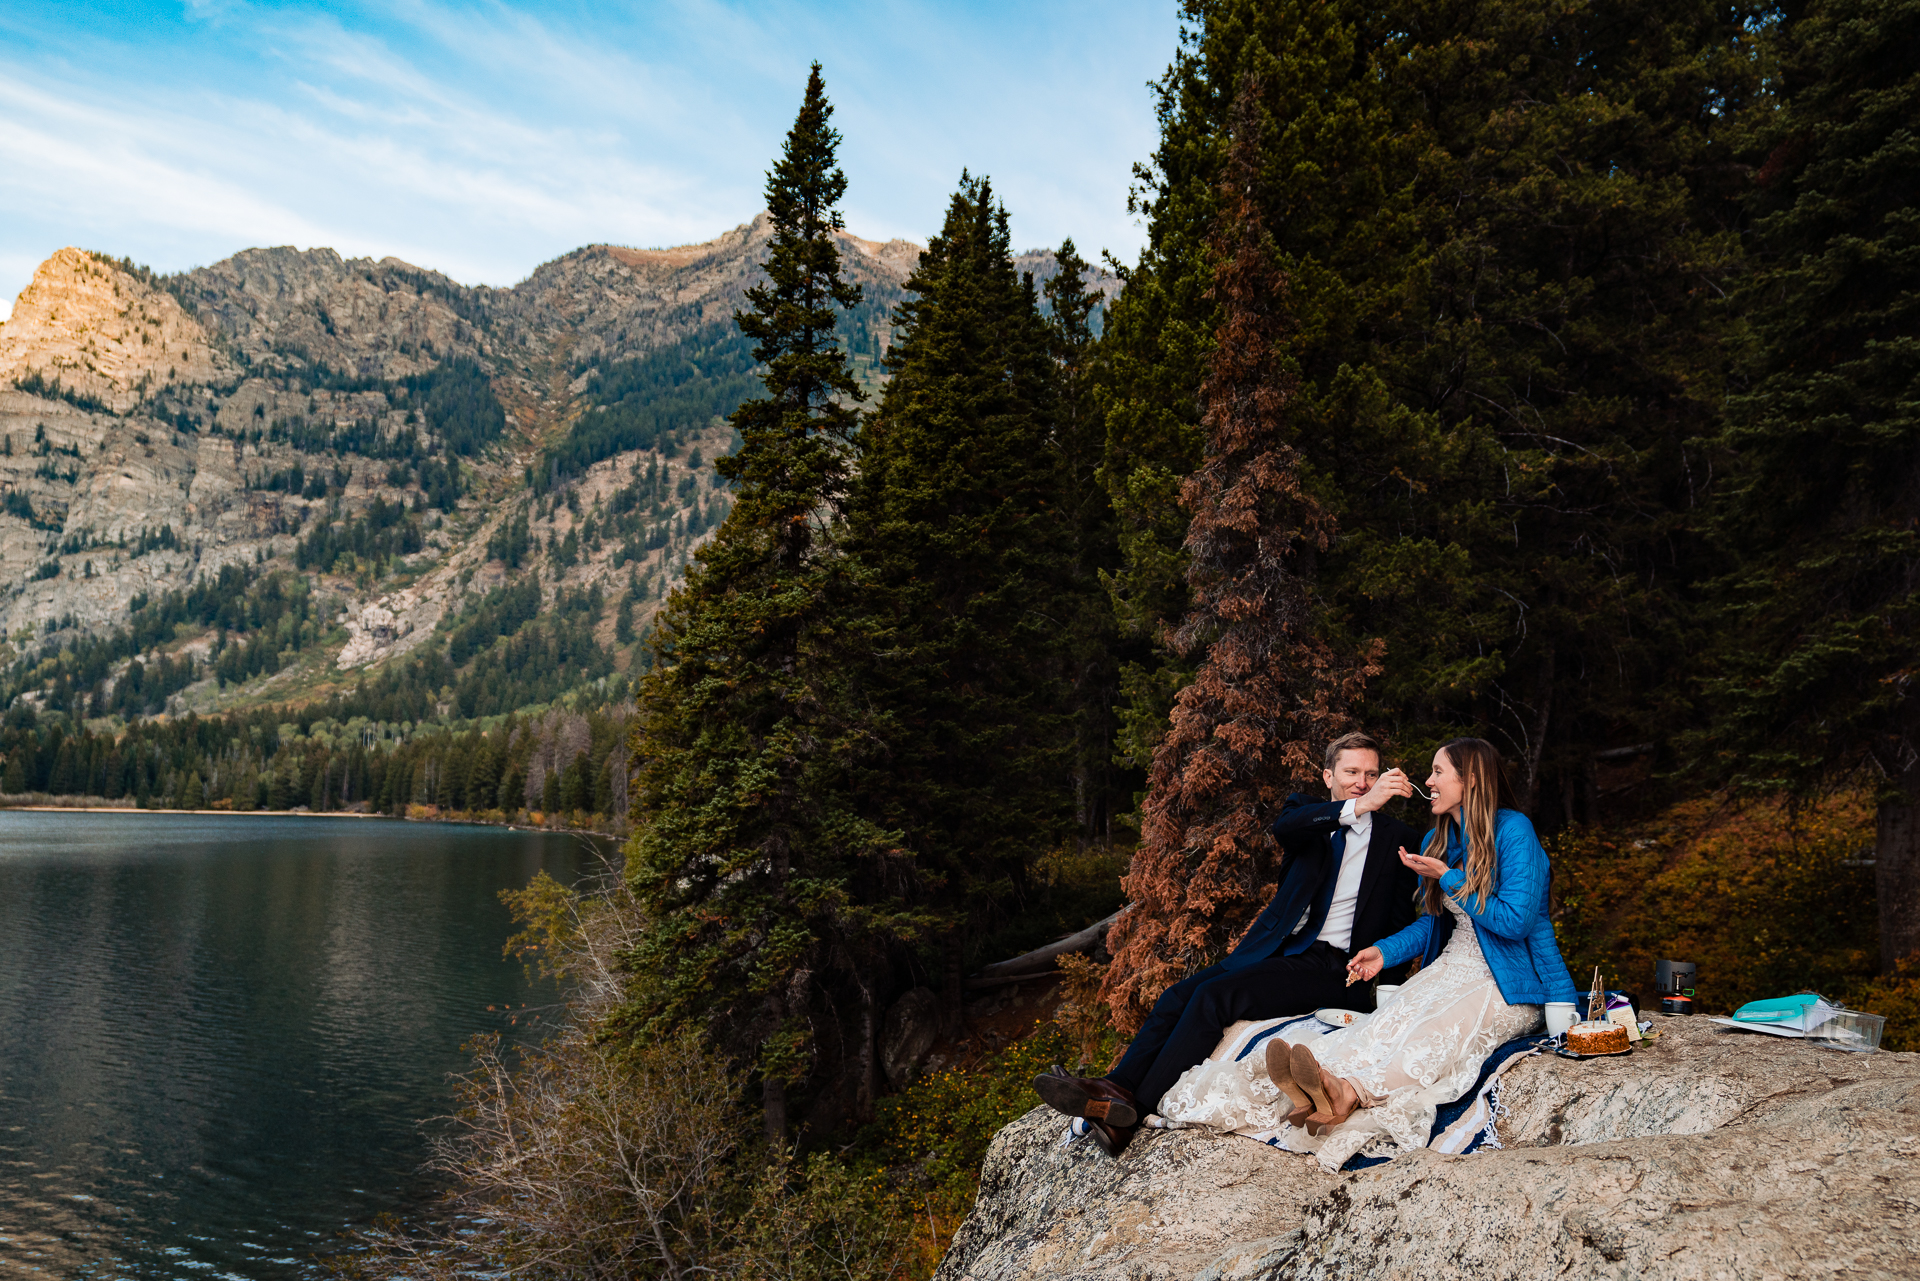 Couple sharing some of their wedding cake together after a beautiful elopement wedding ceremony in Grand Teton National Park